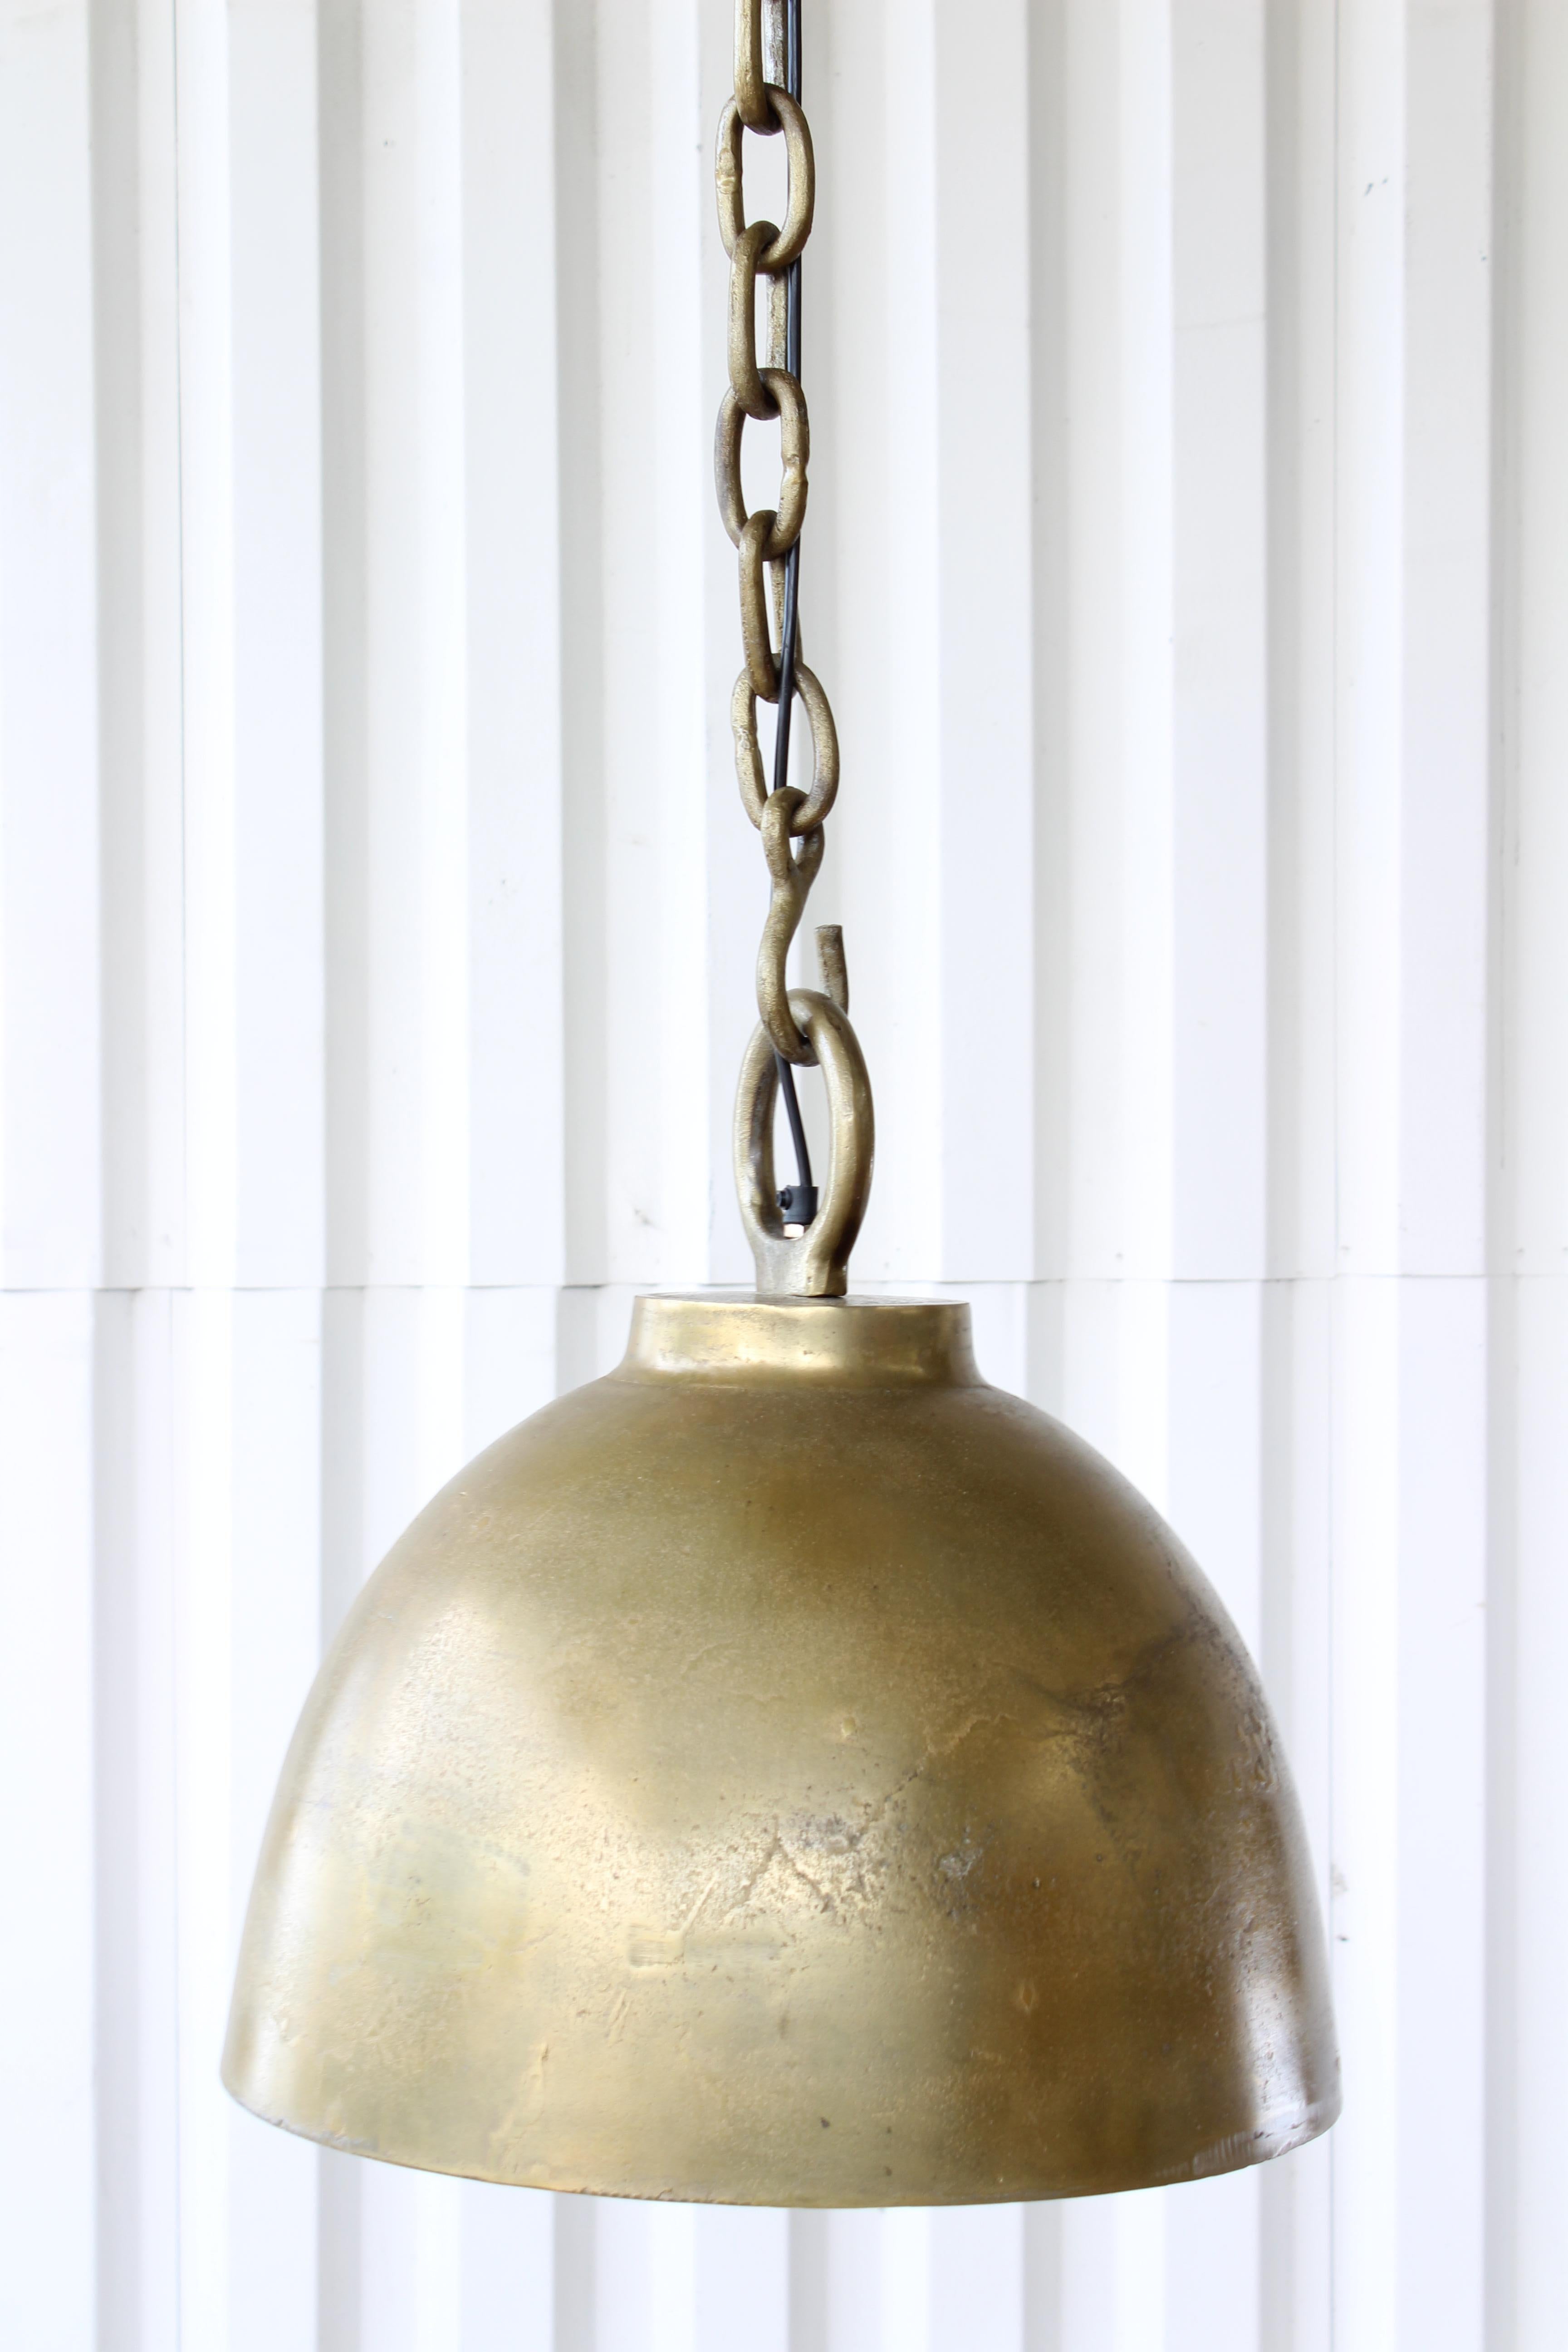 Metal pendant light in antique brass finish. 22 available, each sold individually. Newer production with a vintage look. 62